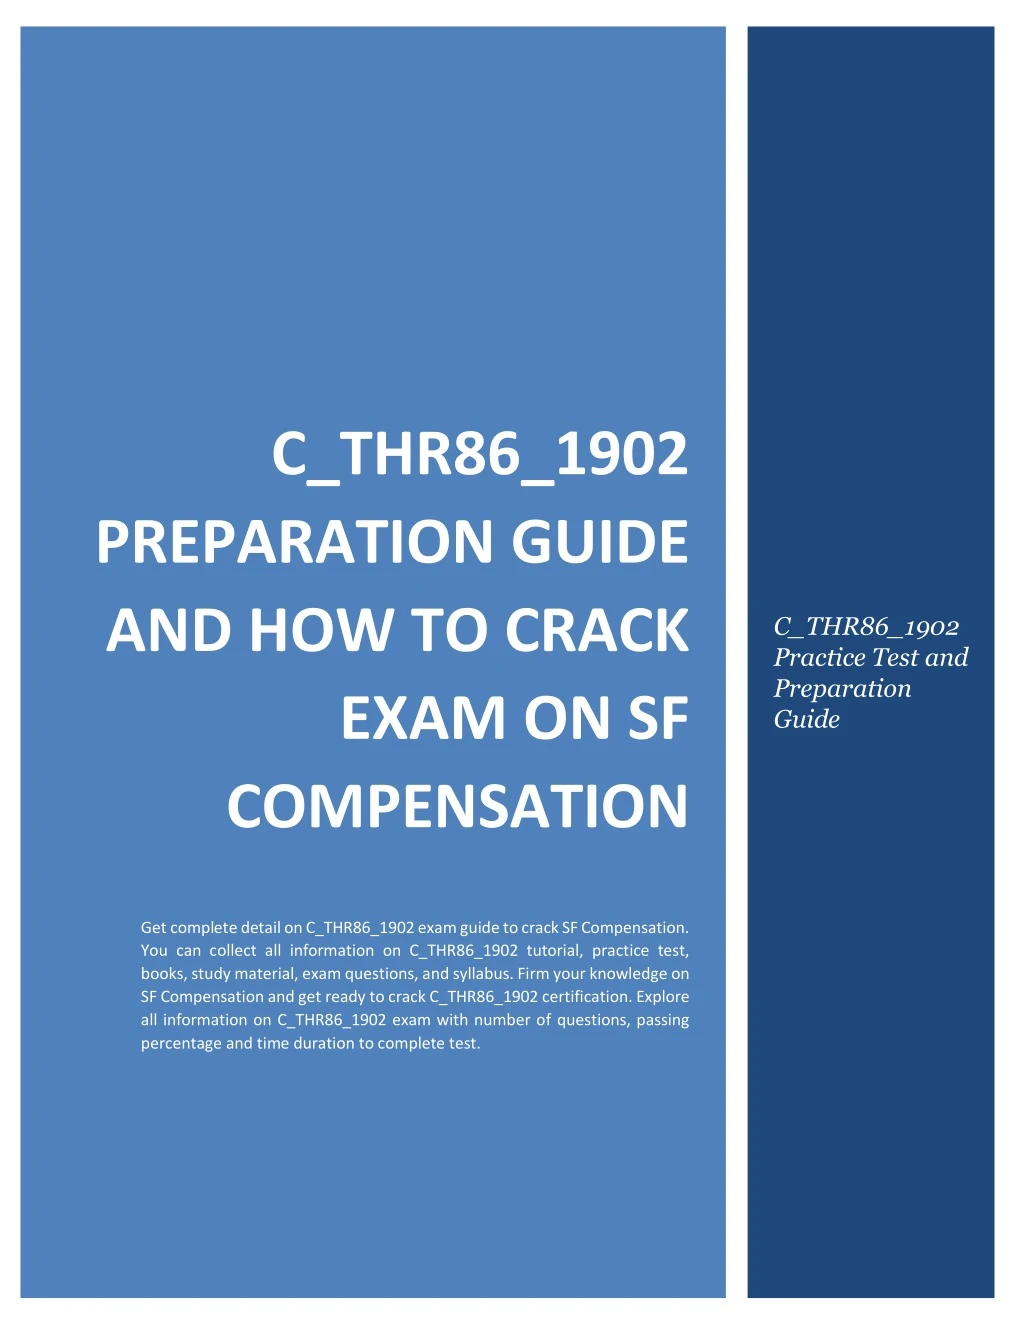 c thr86 1902 preparation guide and how to crack